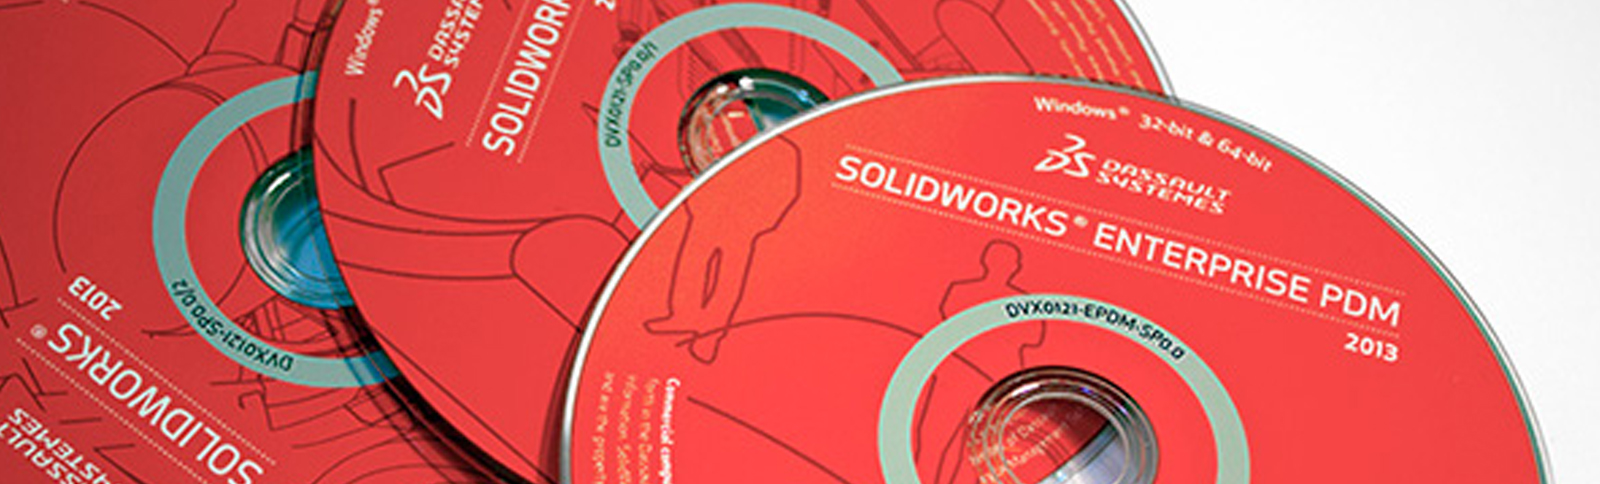 cd duplication in oxfordshire uk